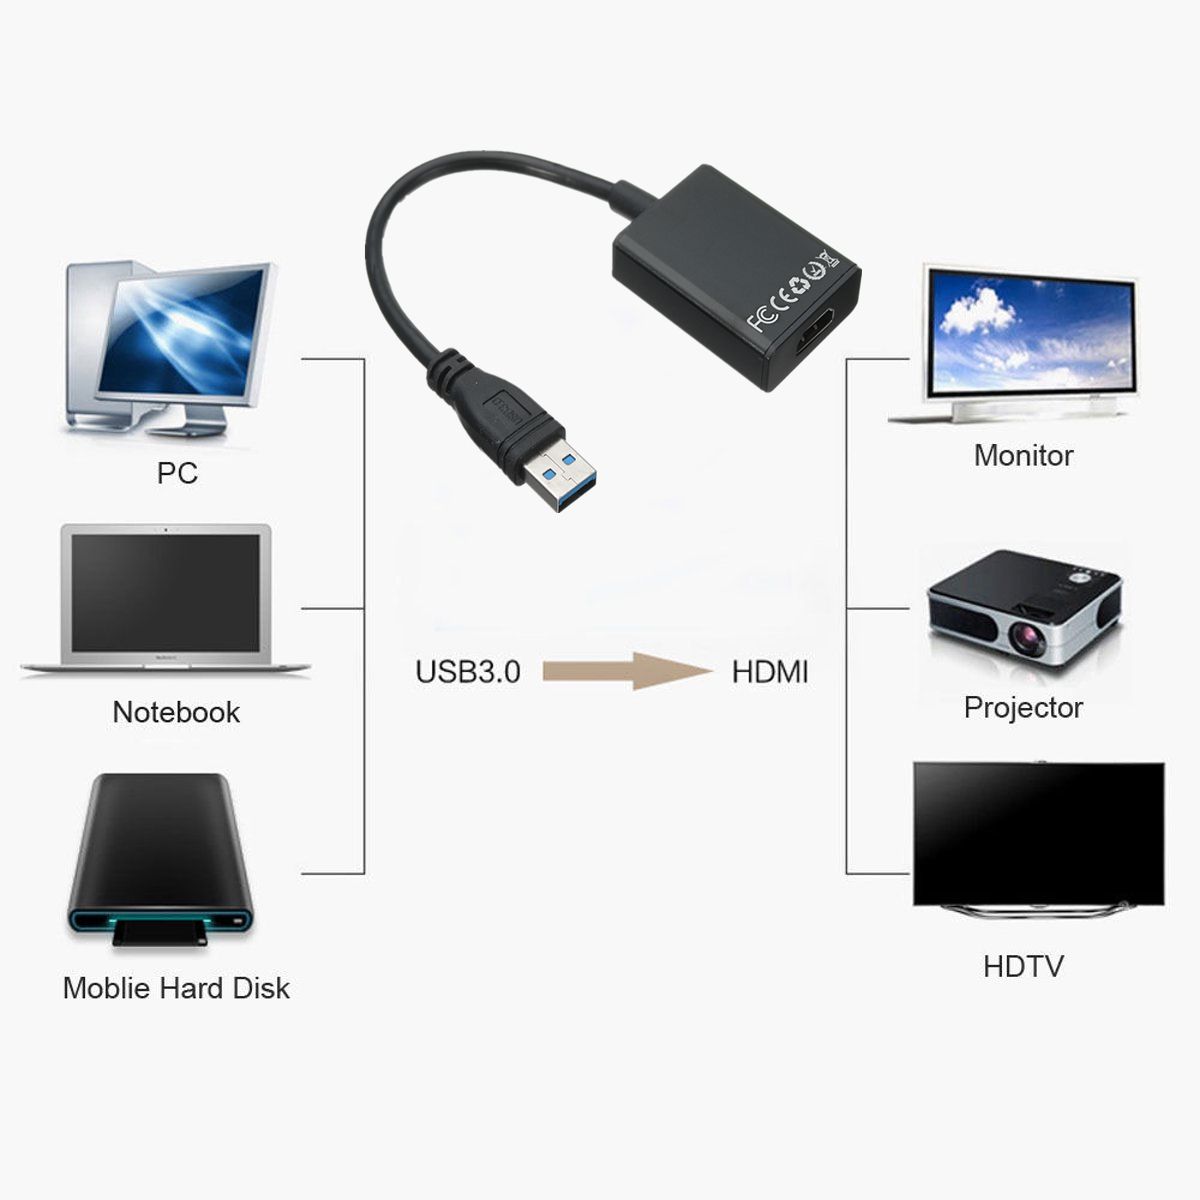 USB-30-To-HD-Audio-Video-Adaptor-Converter-Cable-For-Windows-7-8-10-PC-1080P-1177520